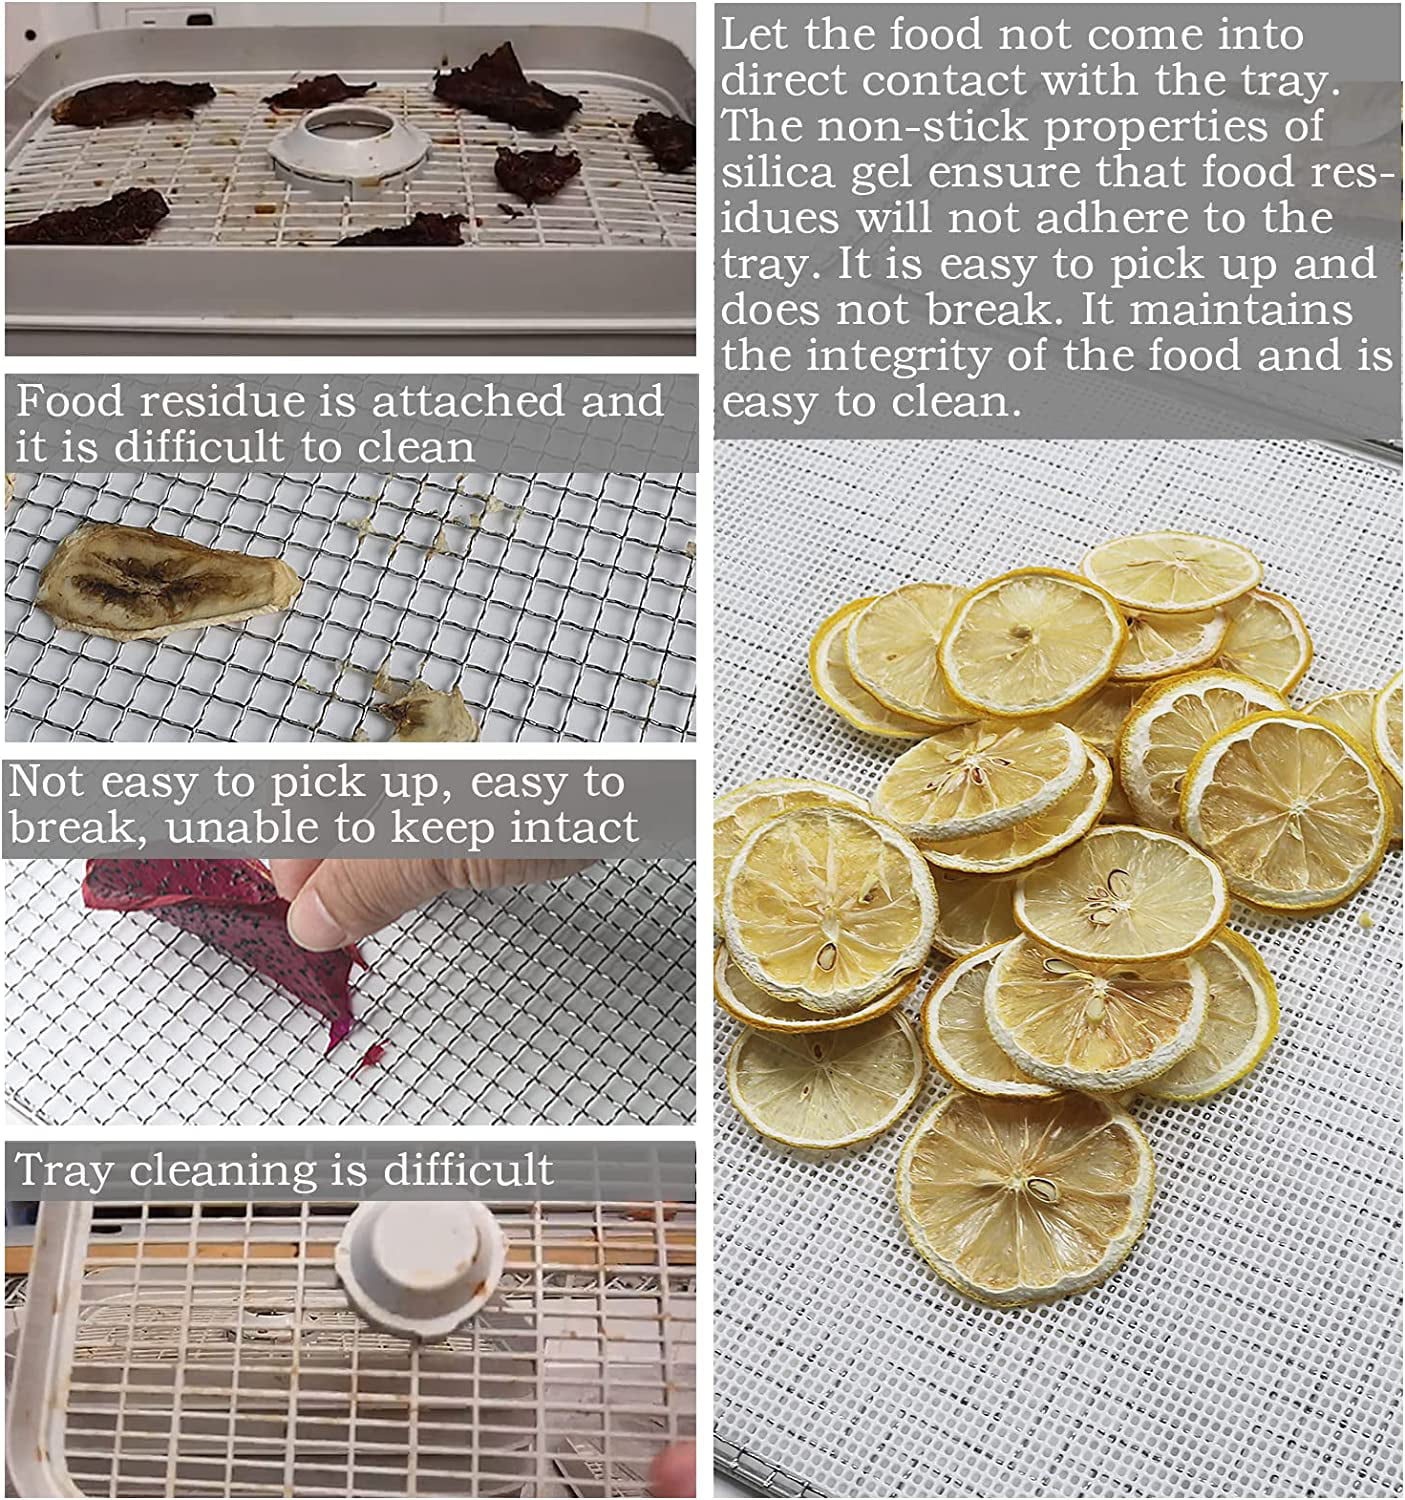 6pcs/12pcs, Silicone Dehydrator Sheets, Fruit Food Dehydrator Sheets, Fine  Mesh Dehydrator Trays, For Jerky, Fruit, And More, For Cosori Dehydrator, E